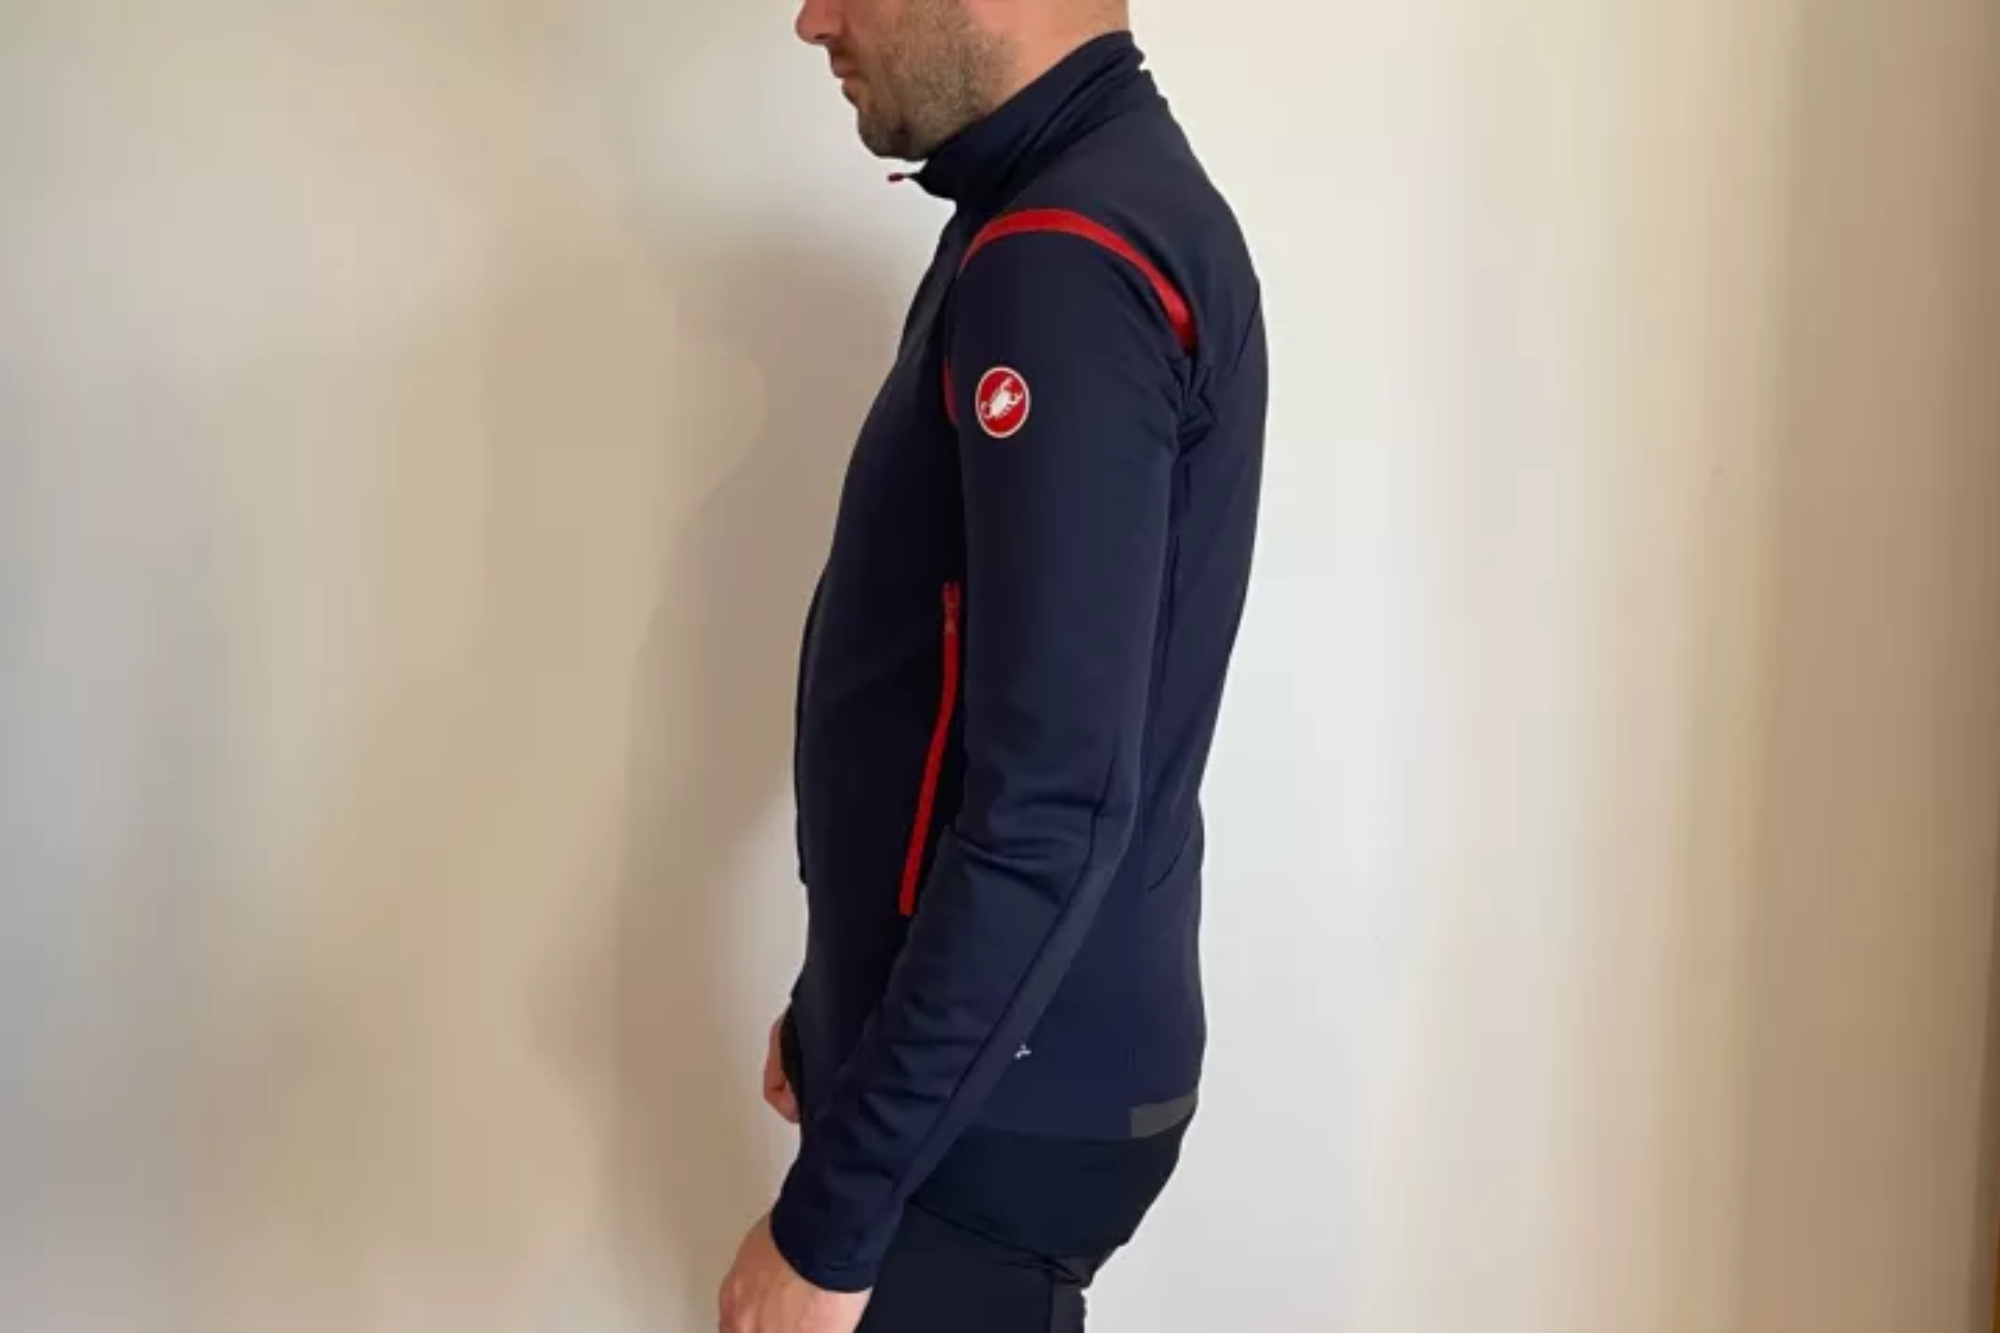 Image shows a rider wearing a Castelli Perfetto ROS long sleeve jacket.